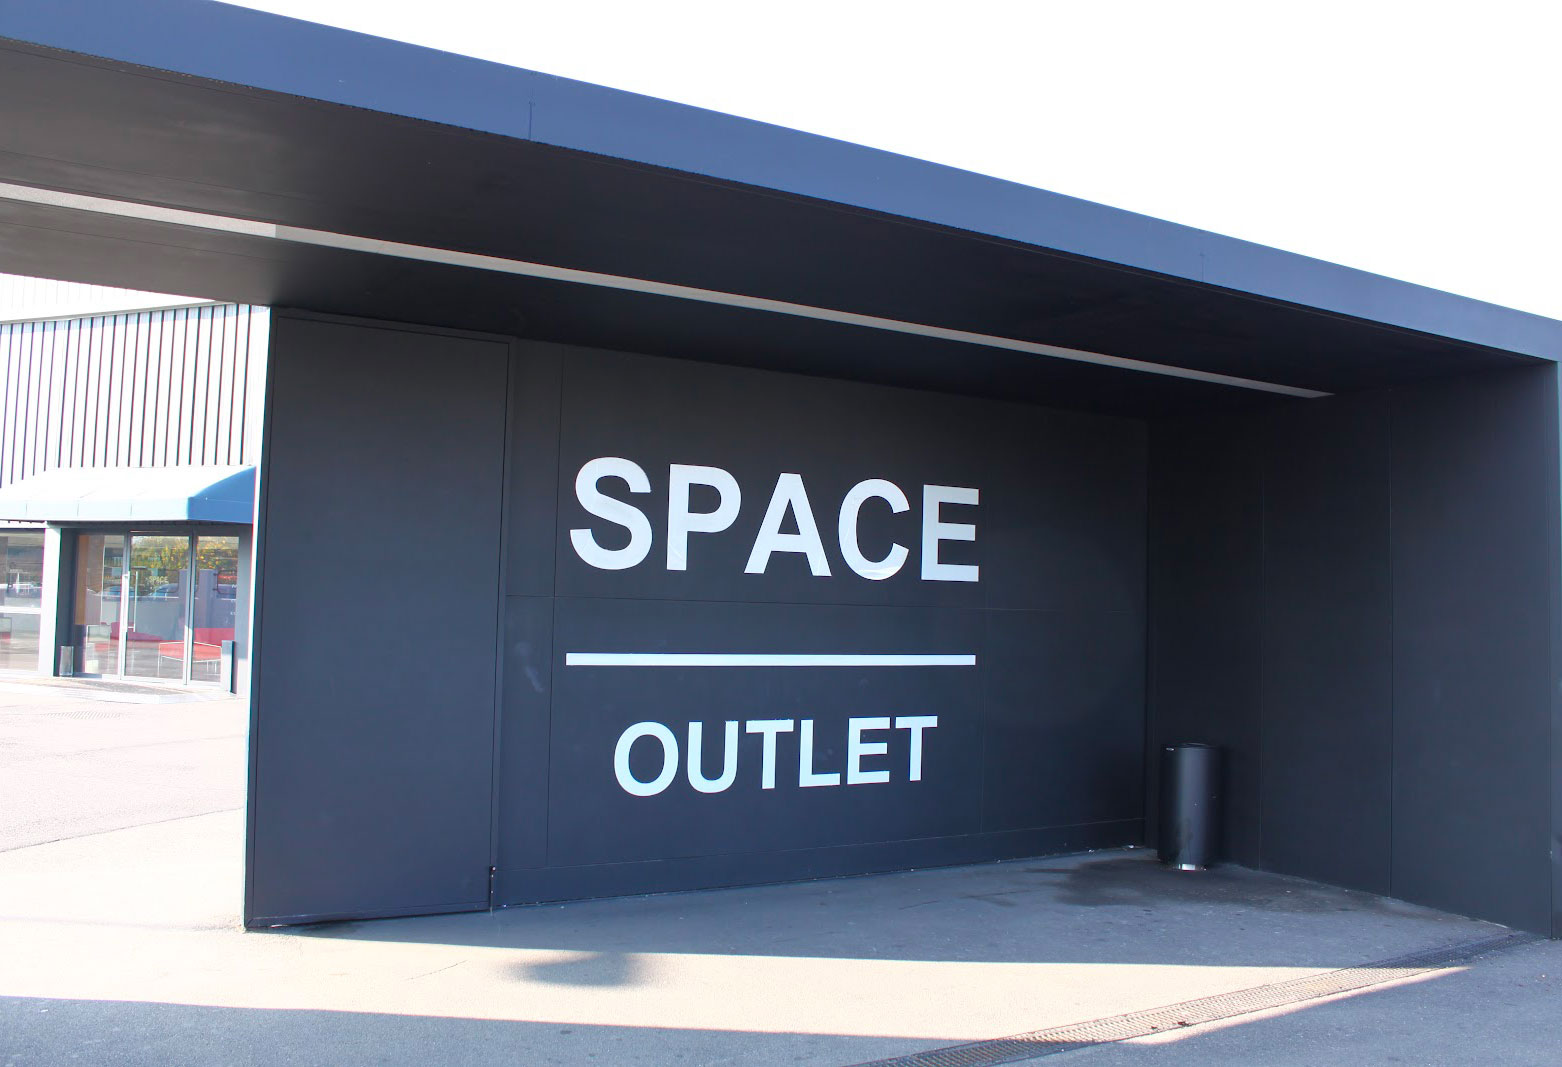 prada the space outlet